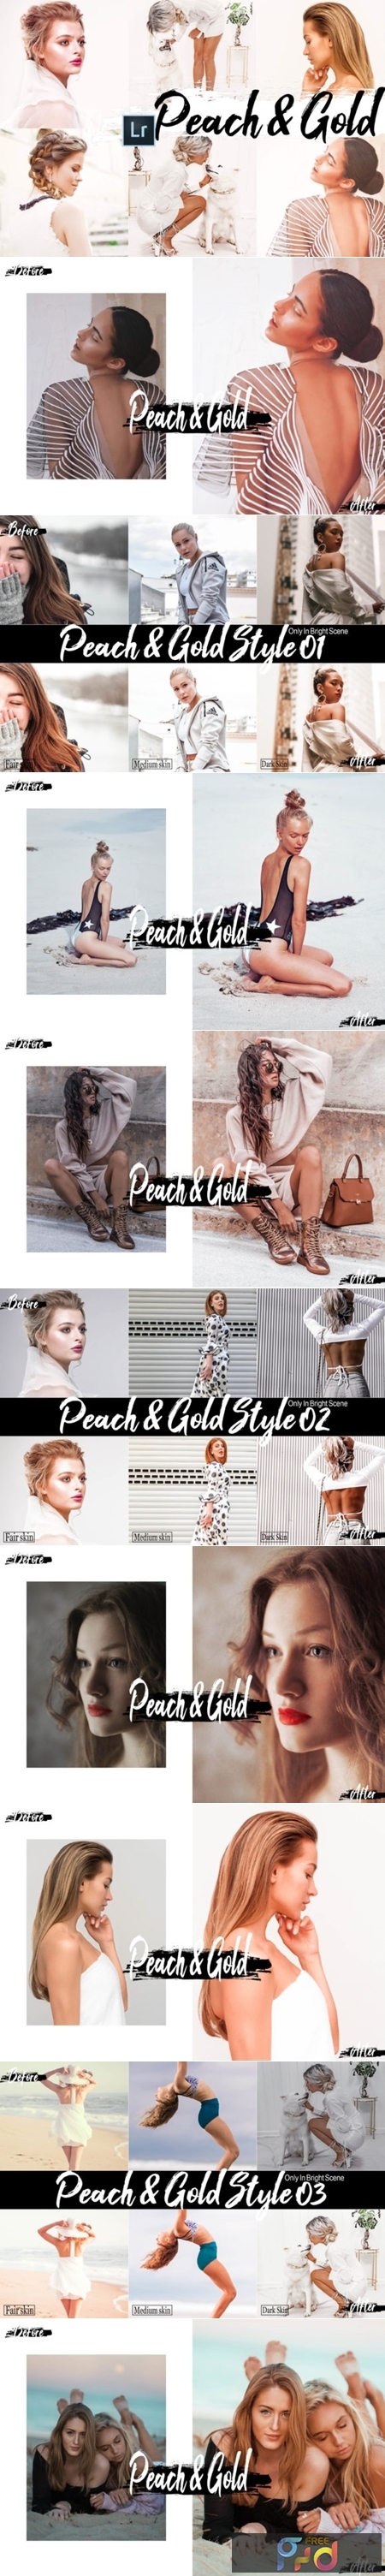 09 Peach & Gold Photoshop Actions, ACR 2536518 1